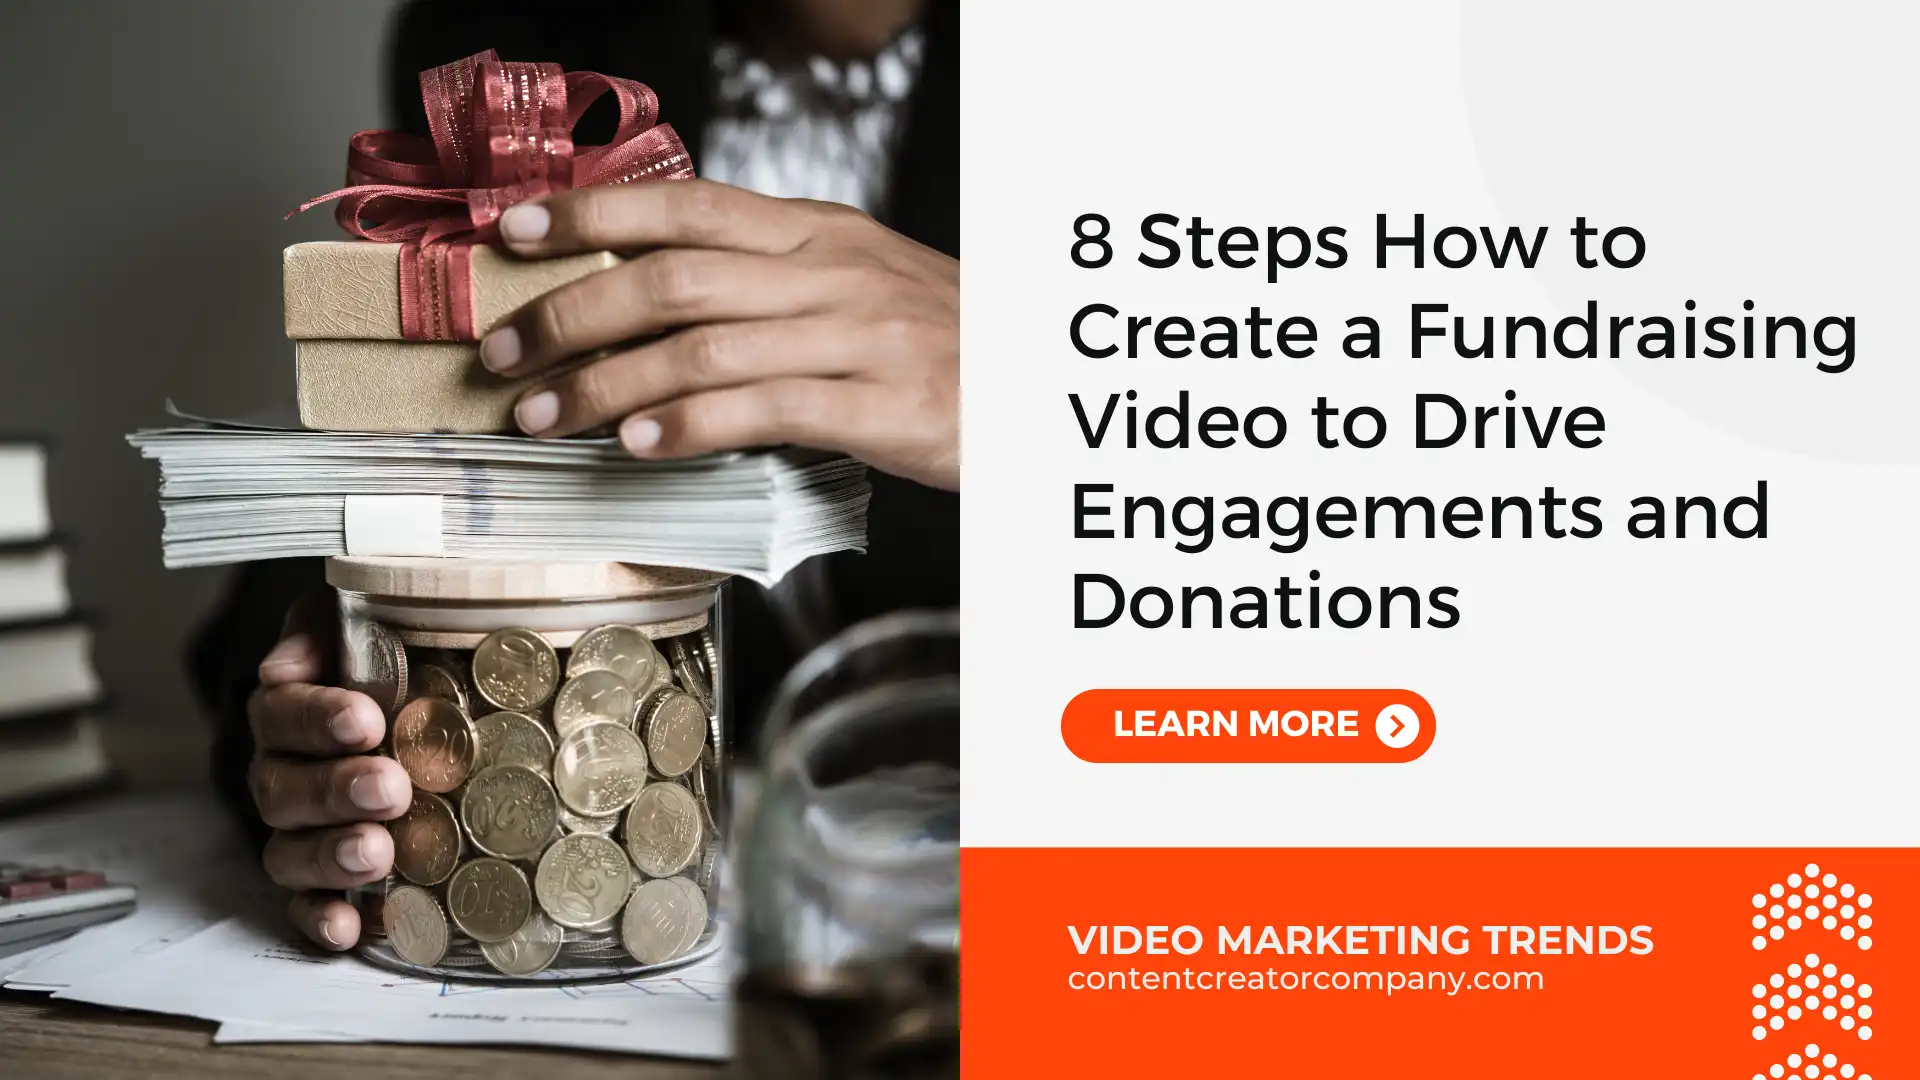 8 Steps How to Create a Fundraising Video to Drive Engagements and Donations